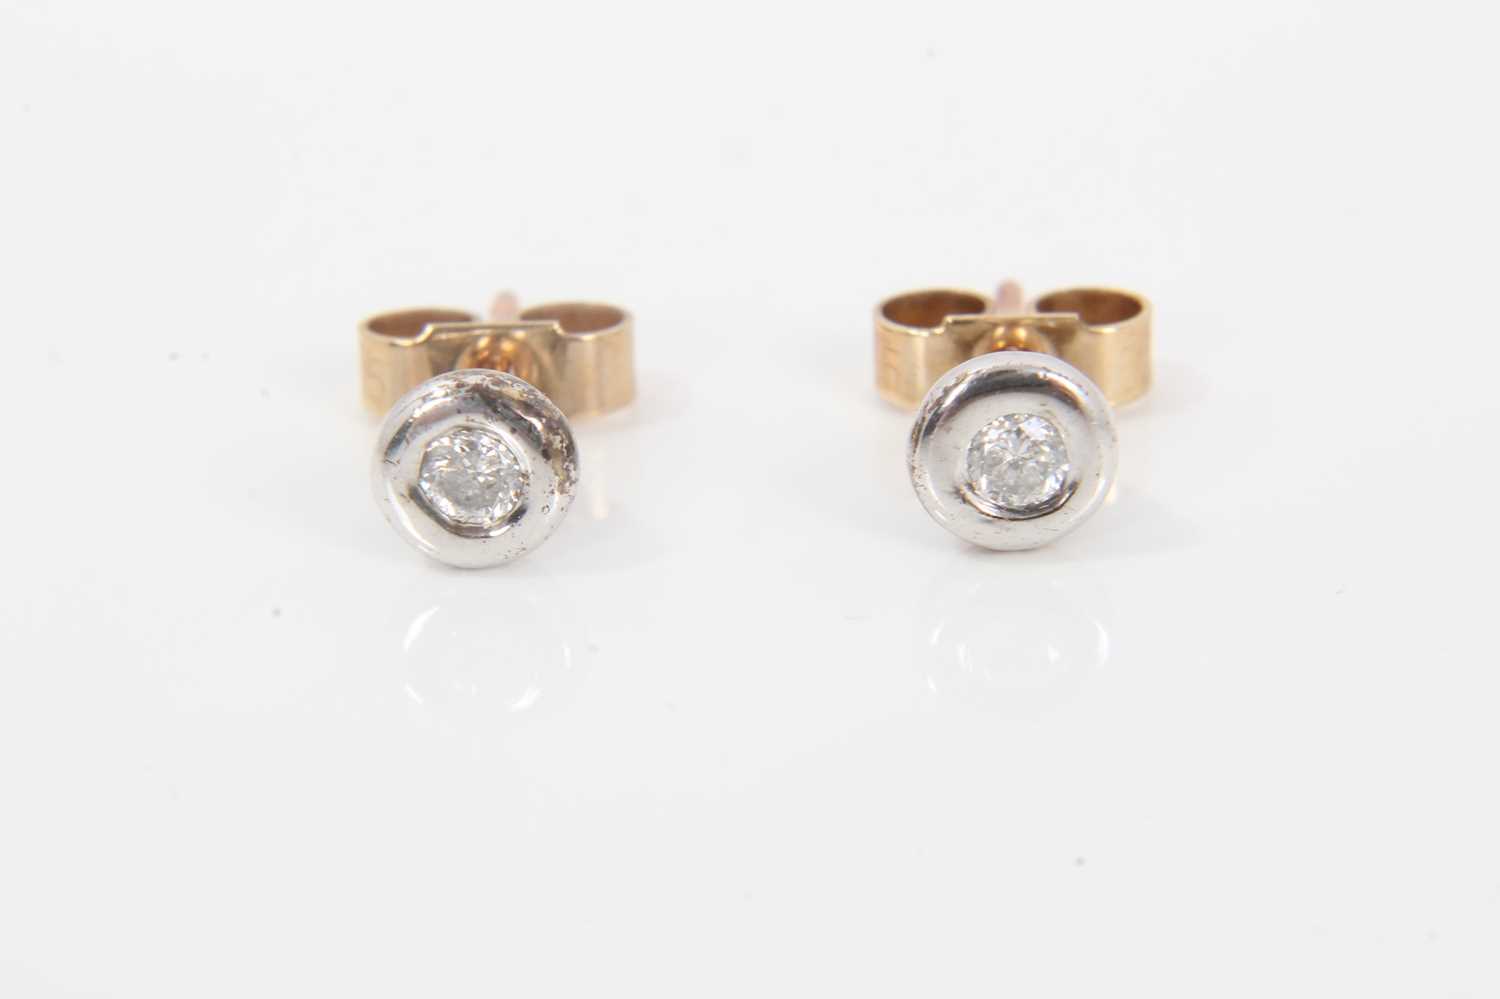 Pair of diamond stud earrings, each with a round brilliant cut diamond weighing approximately 0.05ct